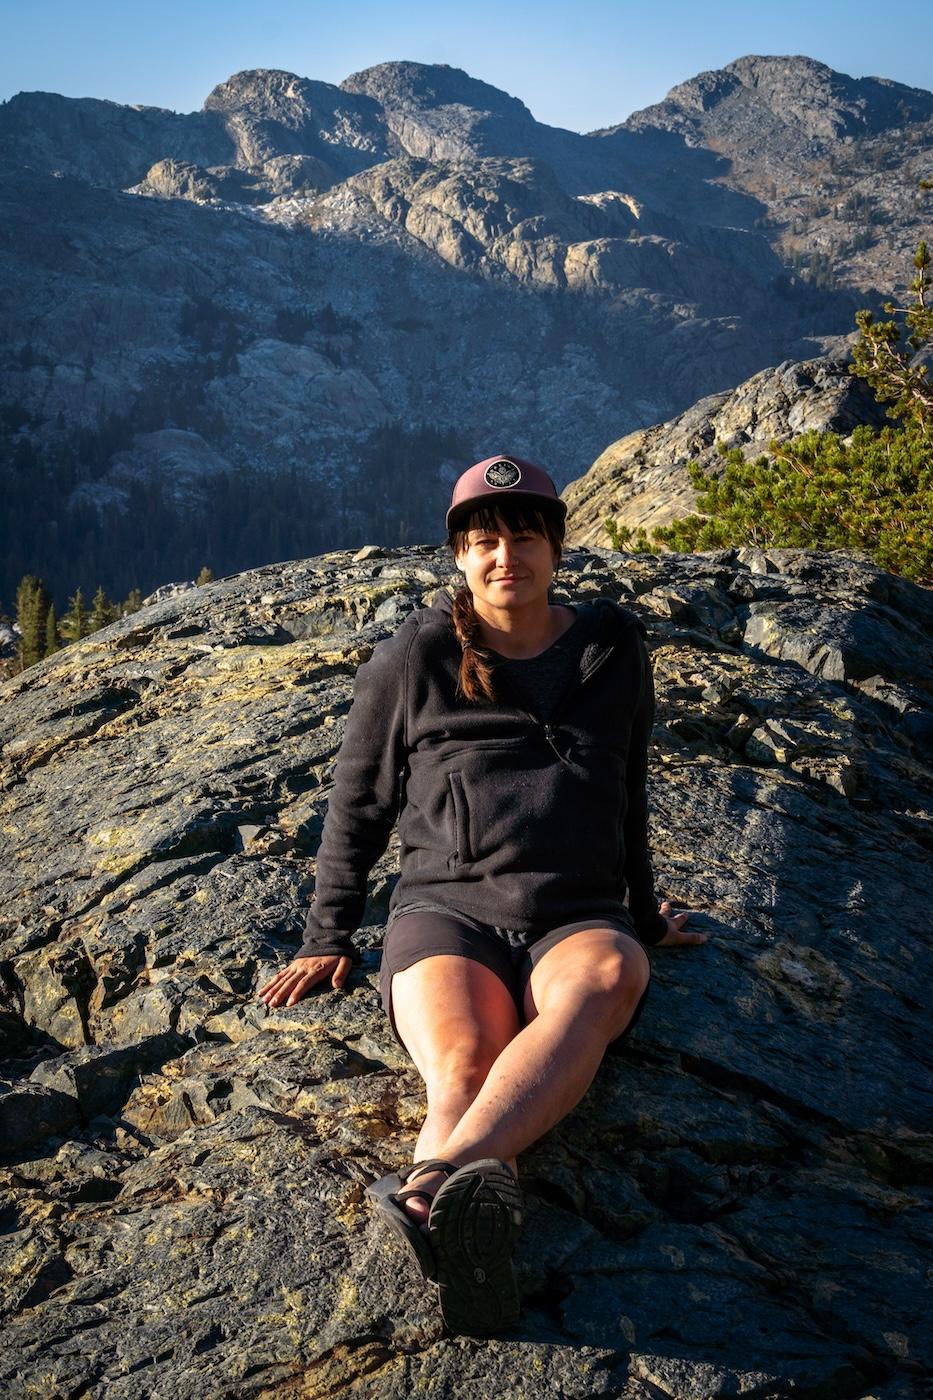 Sam Stych lounging on a rock near Iceberg Lake in the Sierras